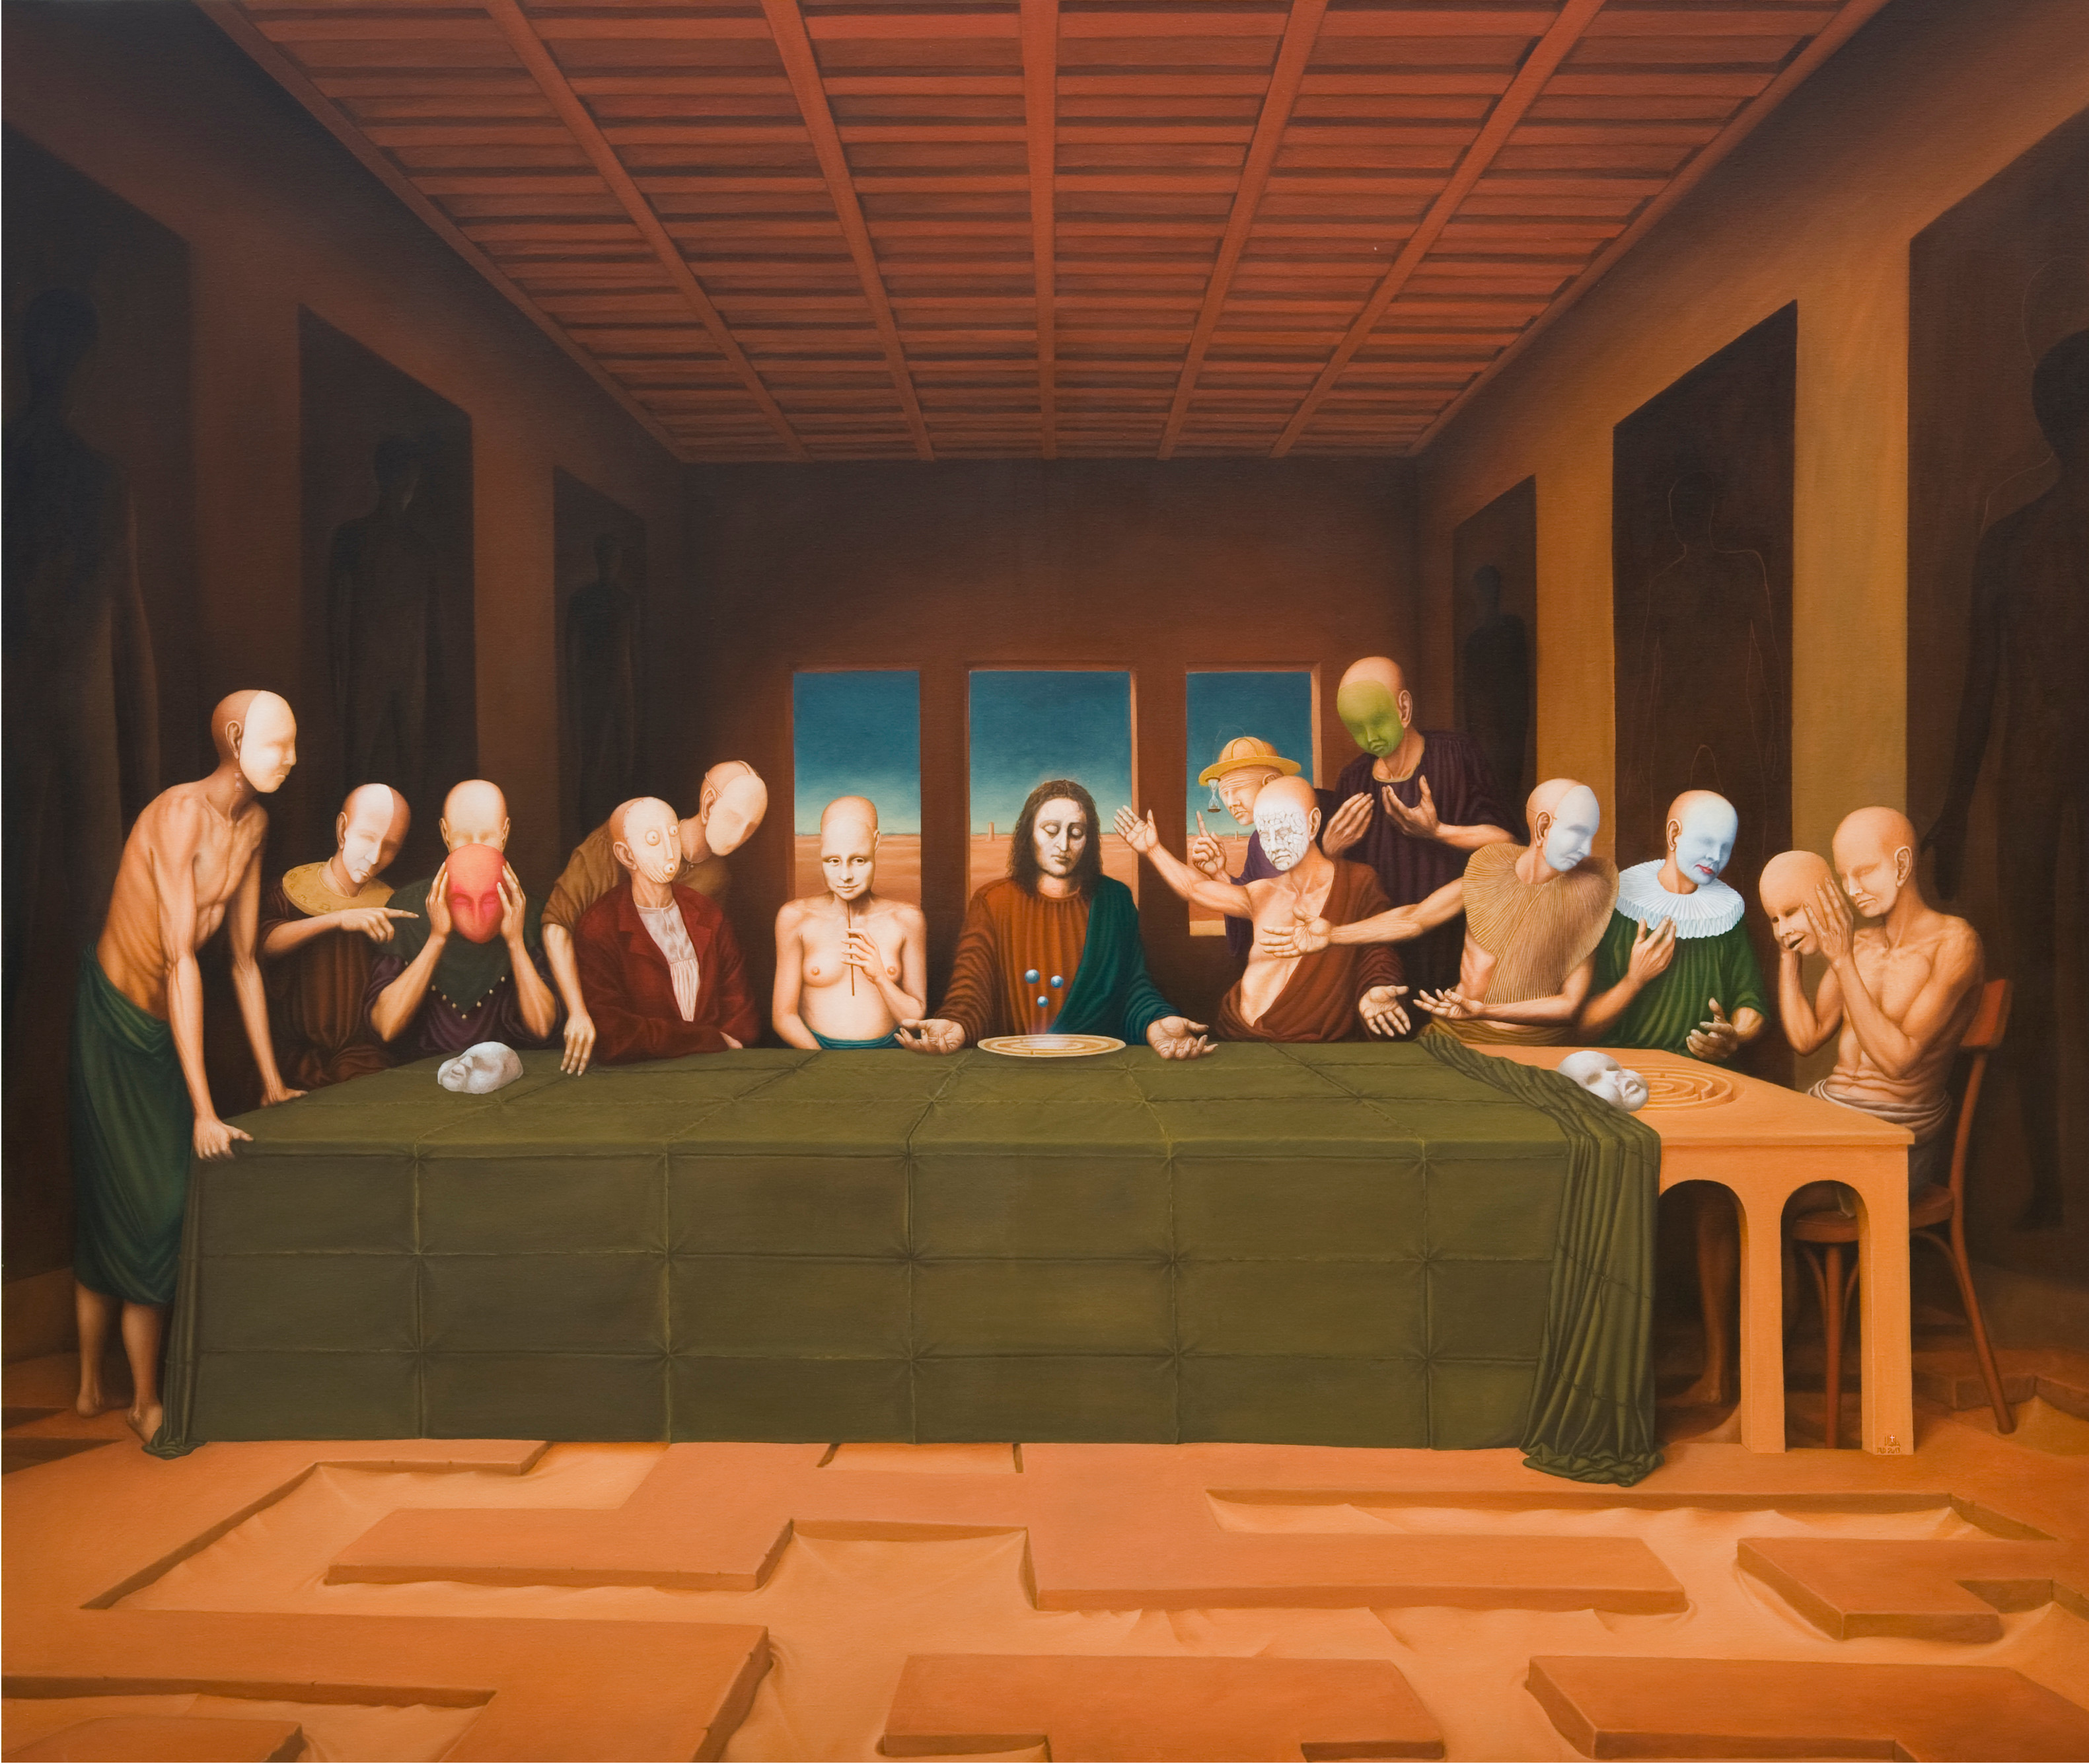 Last Supper,195x162 cm, oil on canvas, 2013